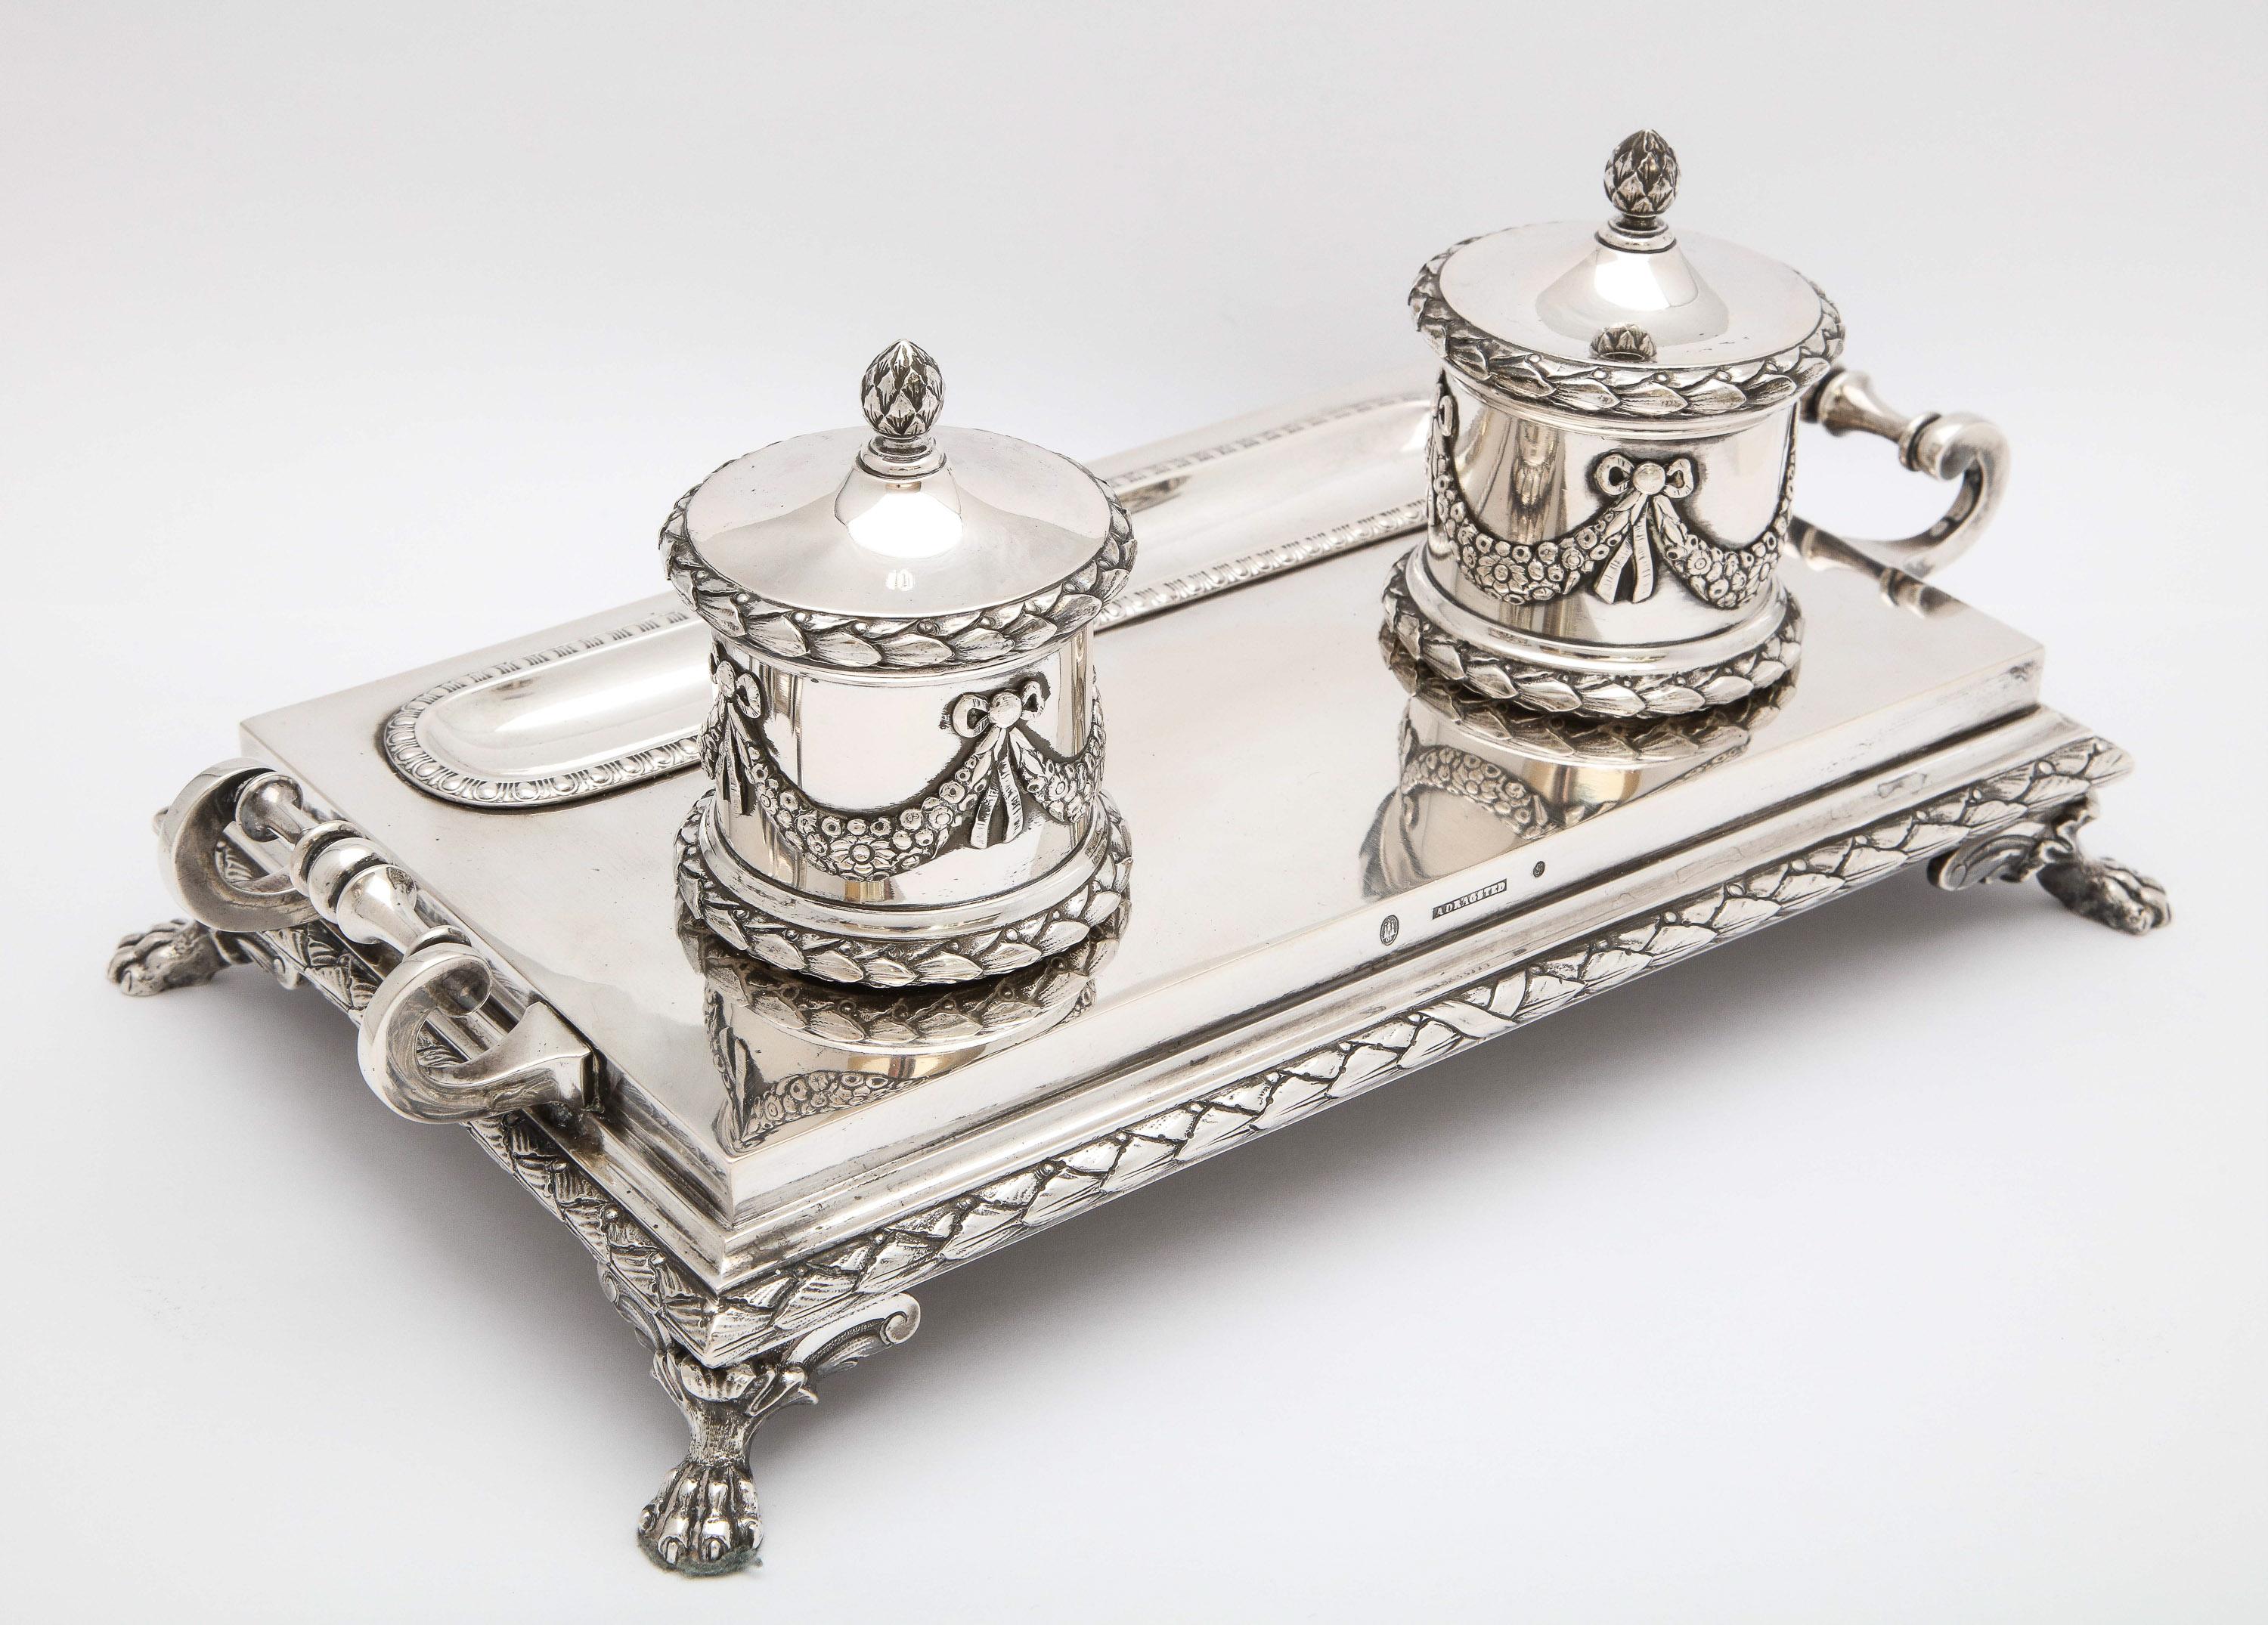 Neoclassical-Style Continental Silver '.800' Footed Double Inkstand by Dragstead For Sale 4